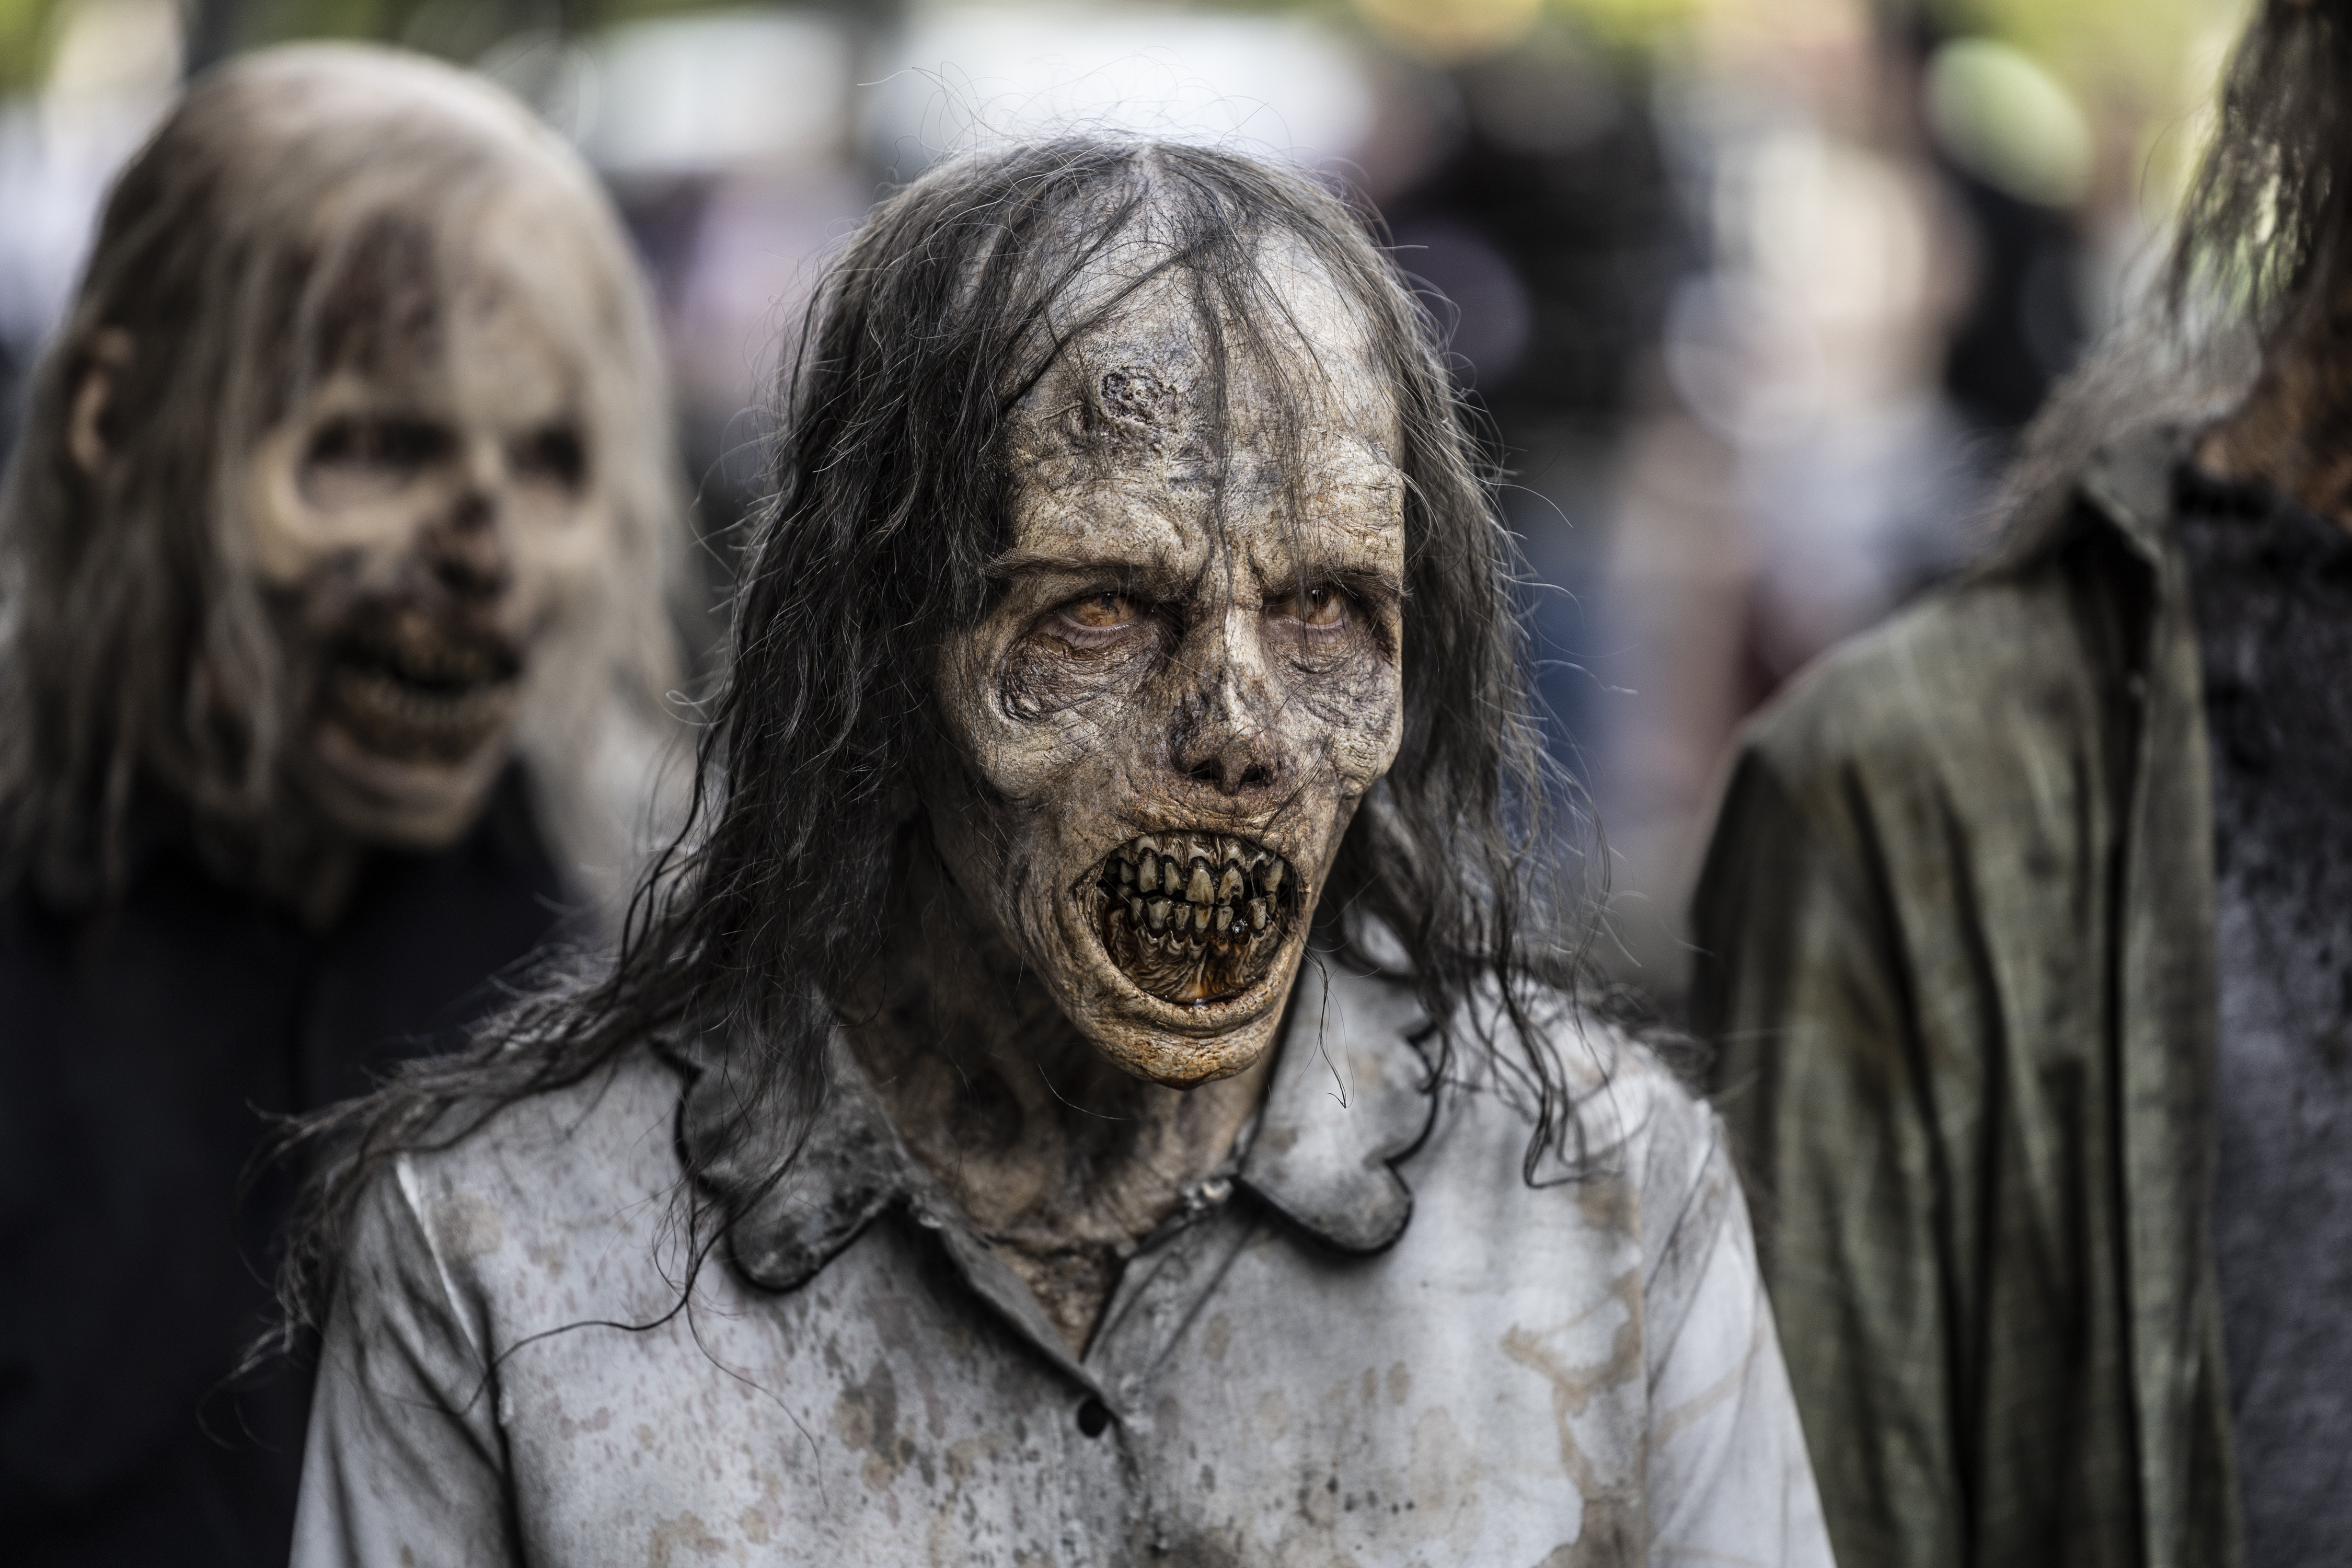 When will 'The Walking Dead: Dead City' spinoff and 'Fear the